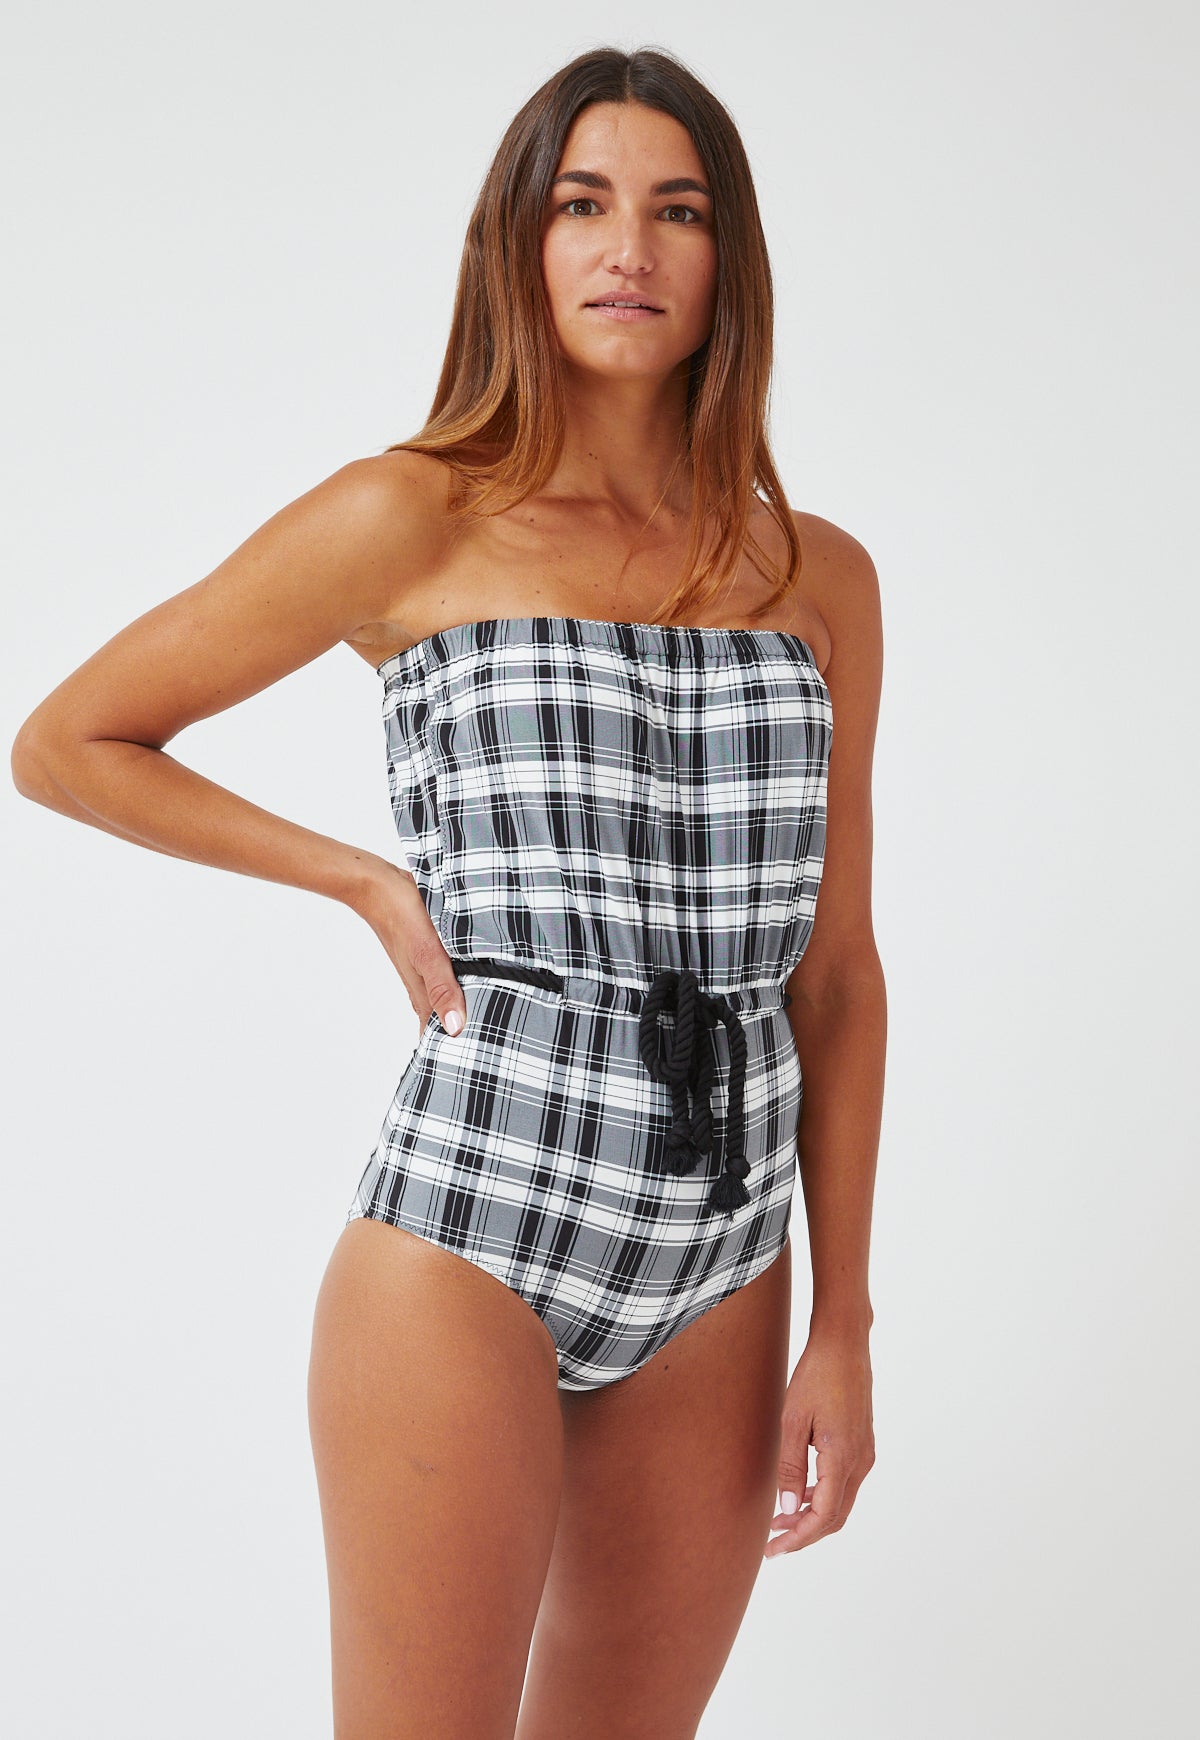 THE VICTOR DRAWSTRING MAILLOT in MADRAS PLAID